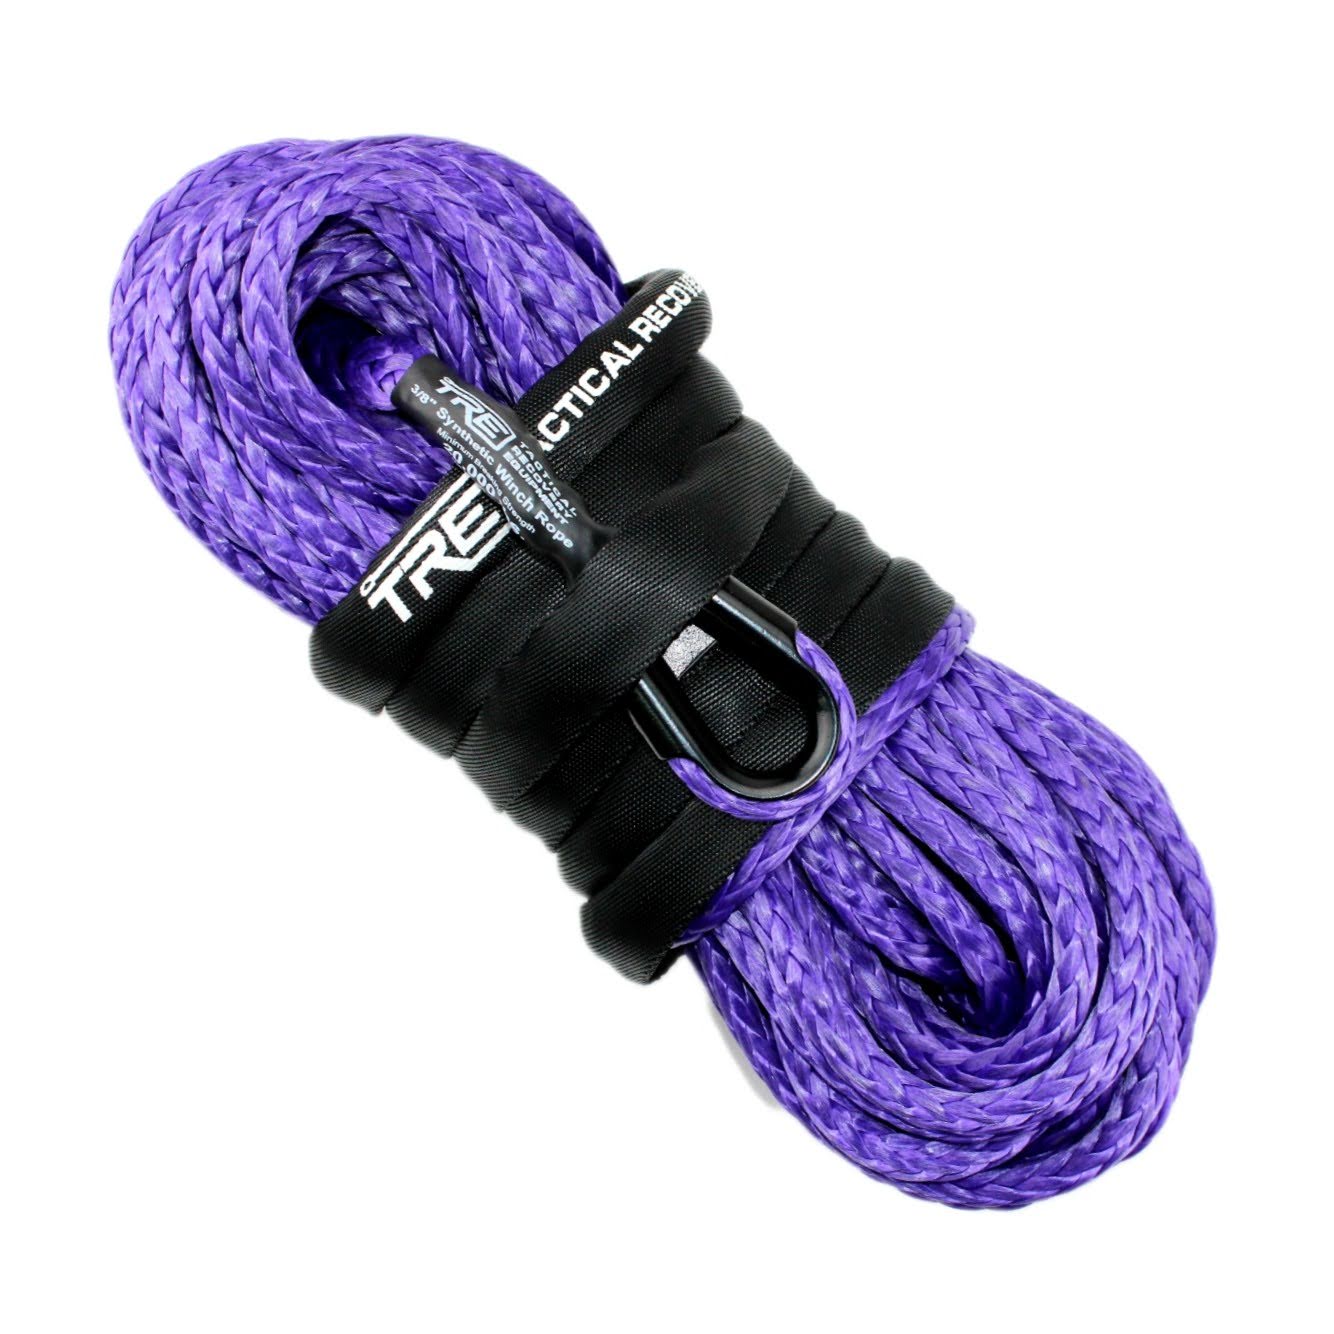 3/8 Synthetic Winch Rope - 20,000 lb. Breaking Strength - Replacement Winch Rope for 6,000 - 12,000 lb. Winches (Winch Rope Color: Purple, Winch Rope